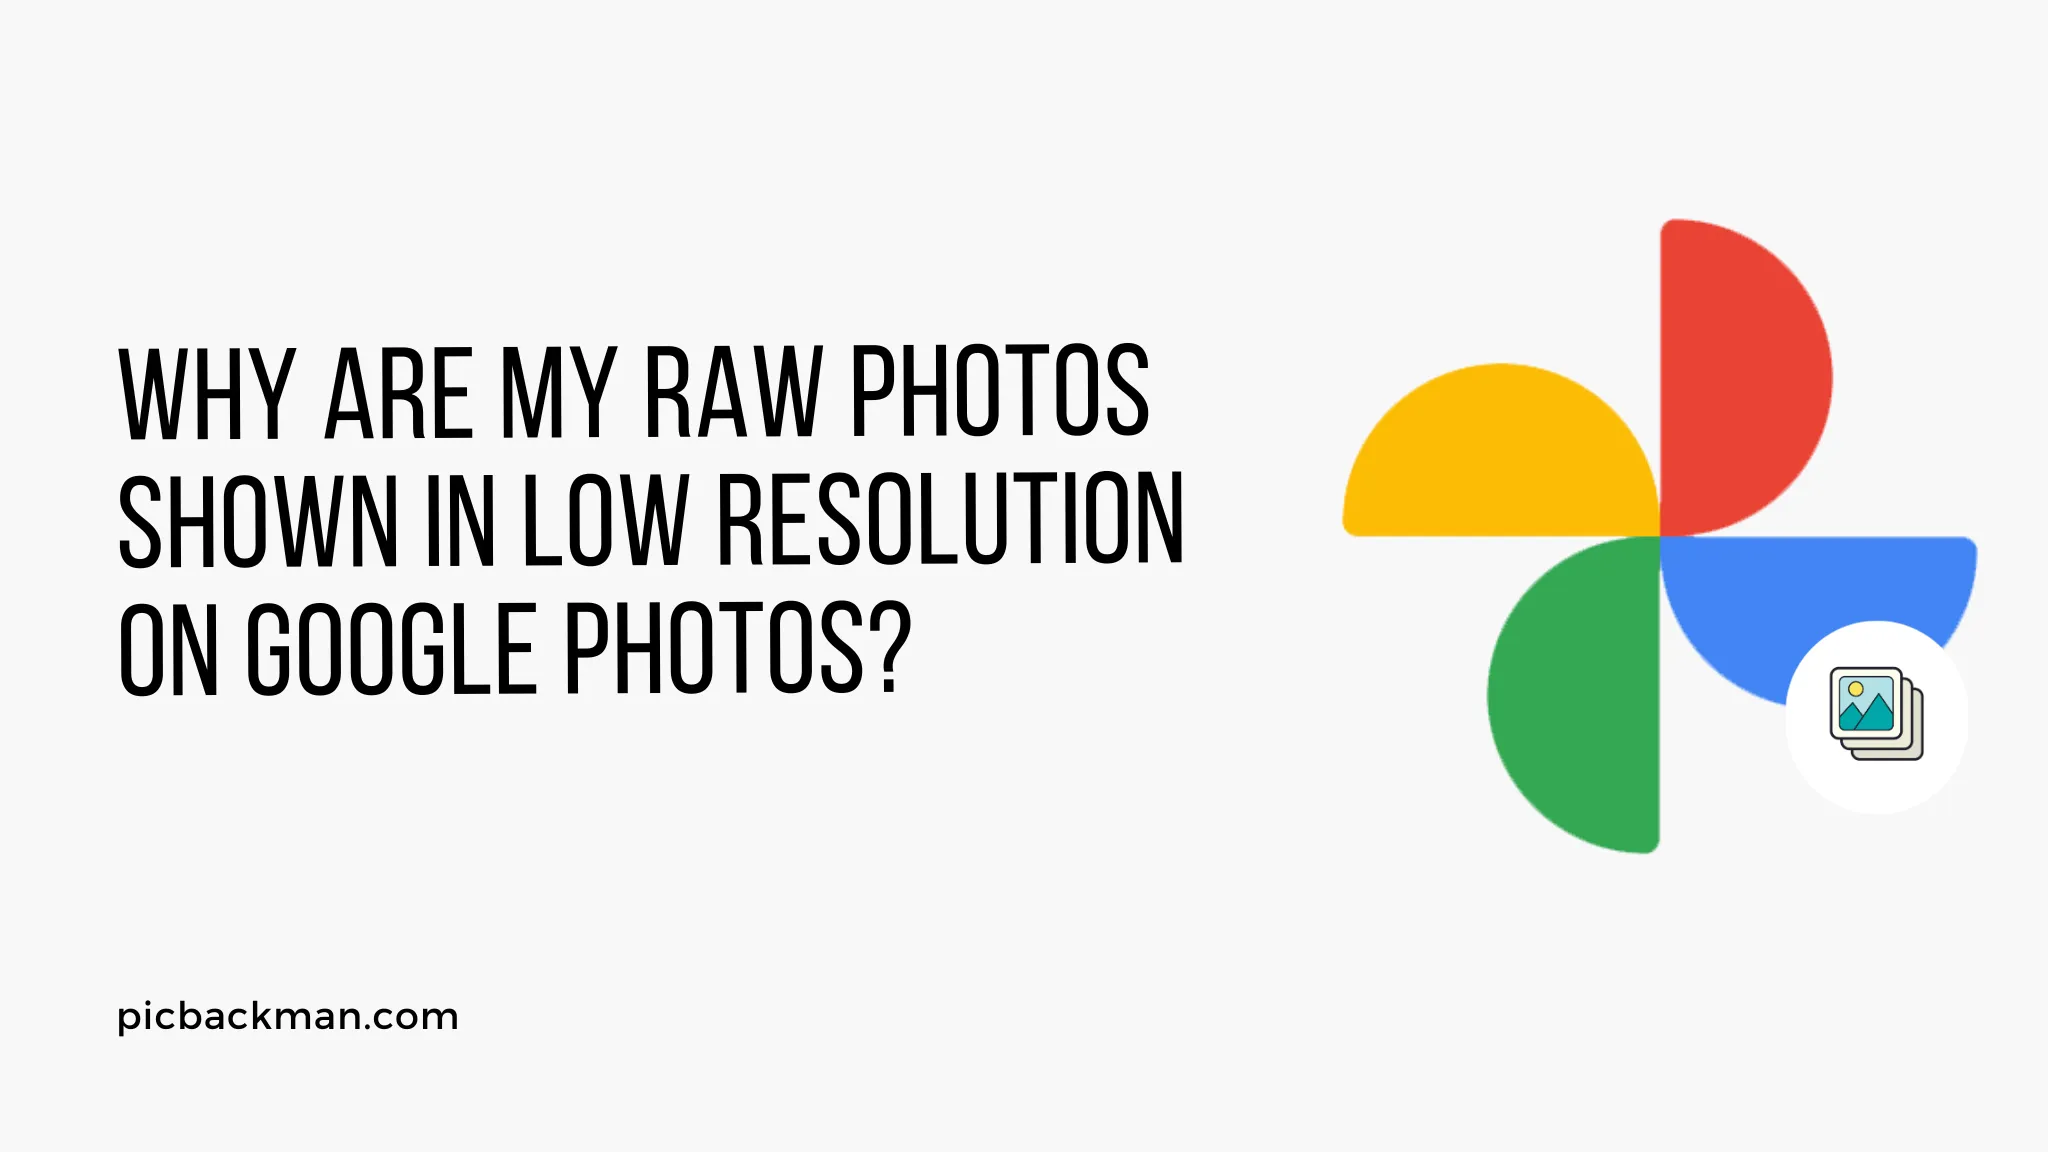 Why are My RAW Photos Shown in Low Resolution on Google Photos?